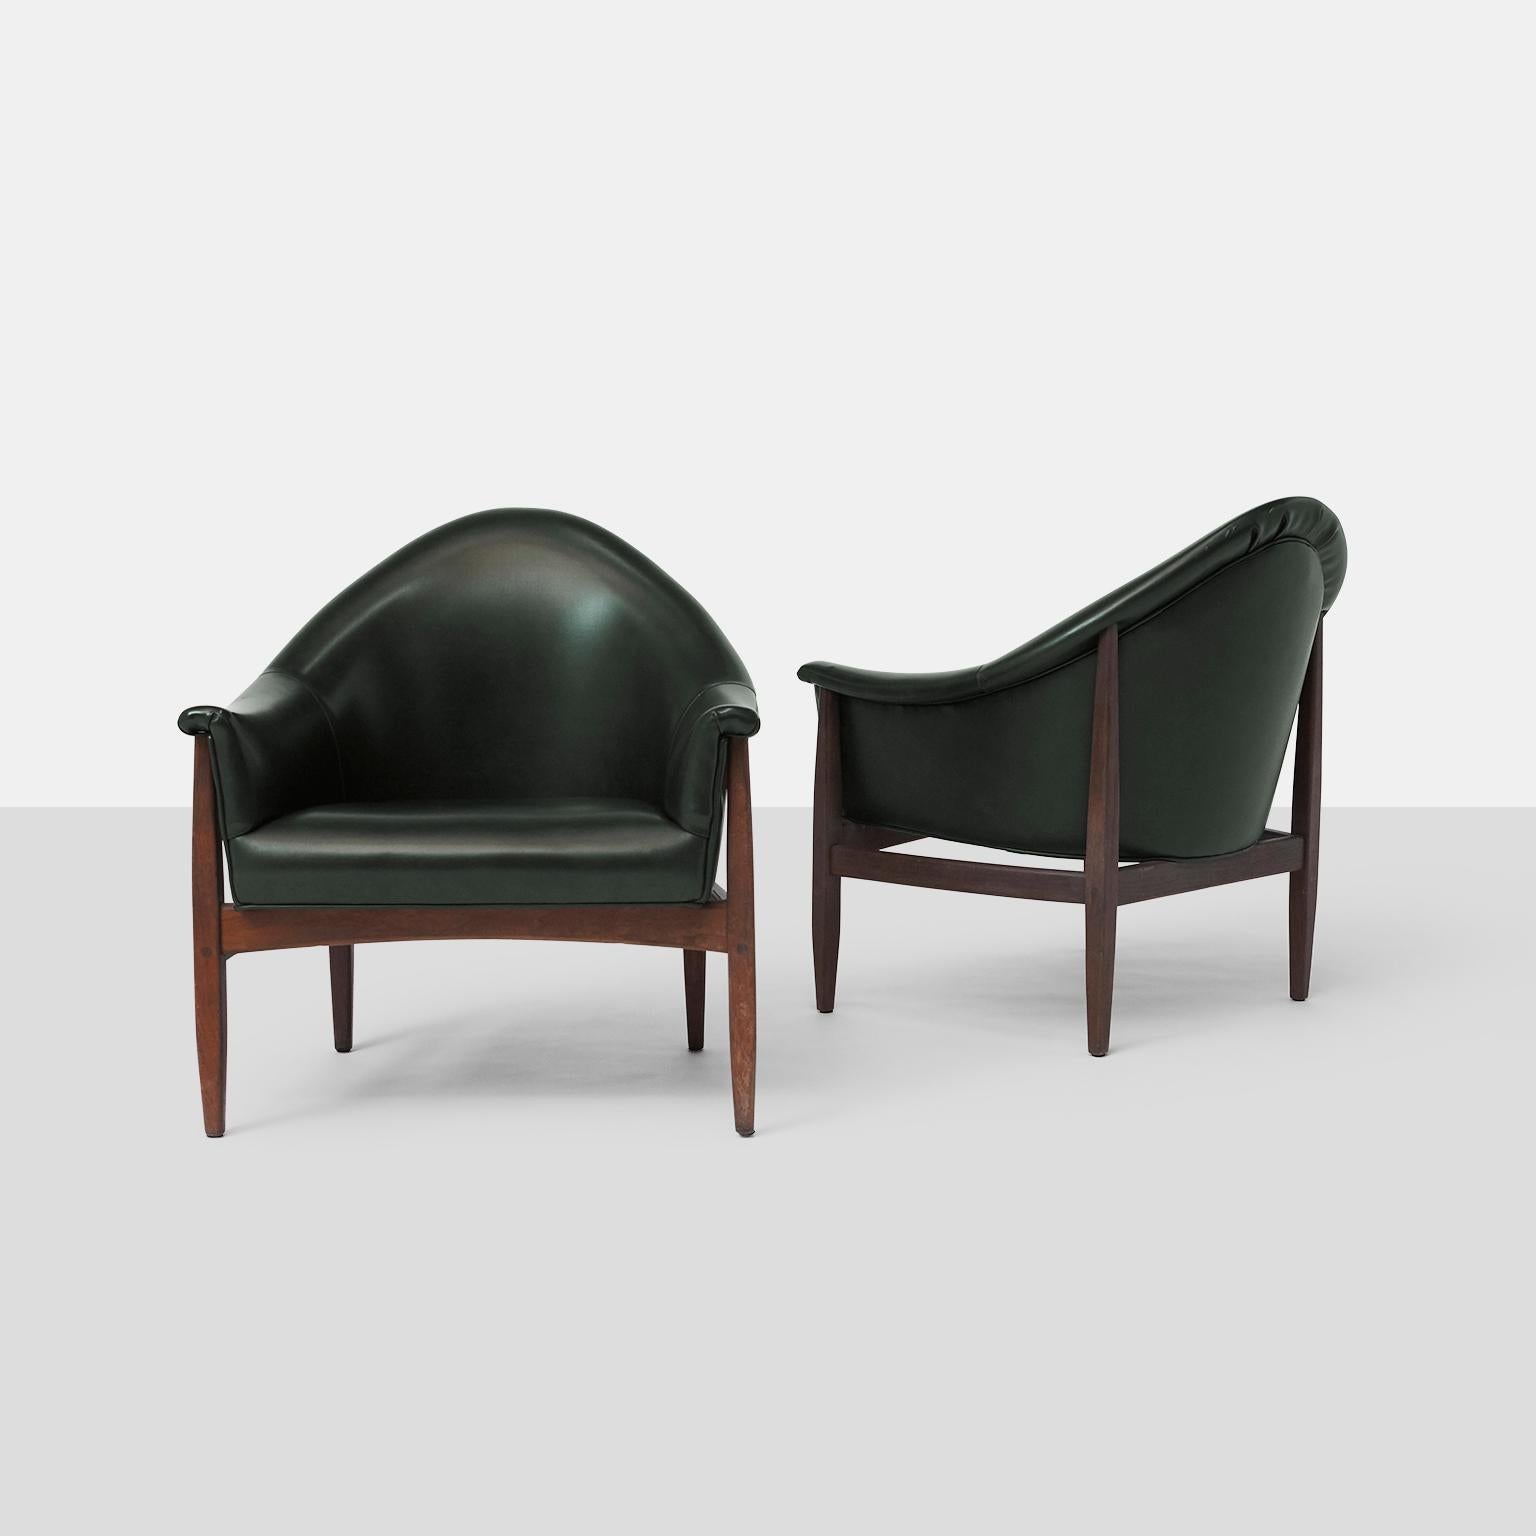 A pair of round back club chairs by Milo Baughman for Thayer Coggin. A rare, early style that marked the beginning of their long collaboration. 
Walnut frames support low scoop seating and covered in a dark green vinyl.